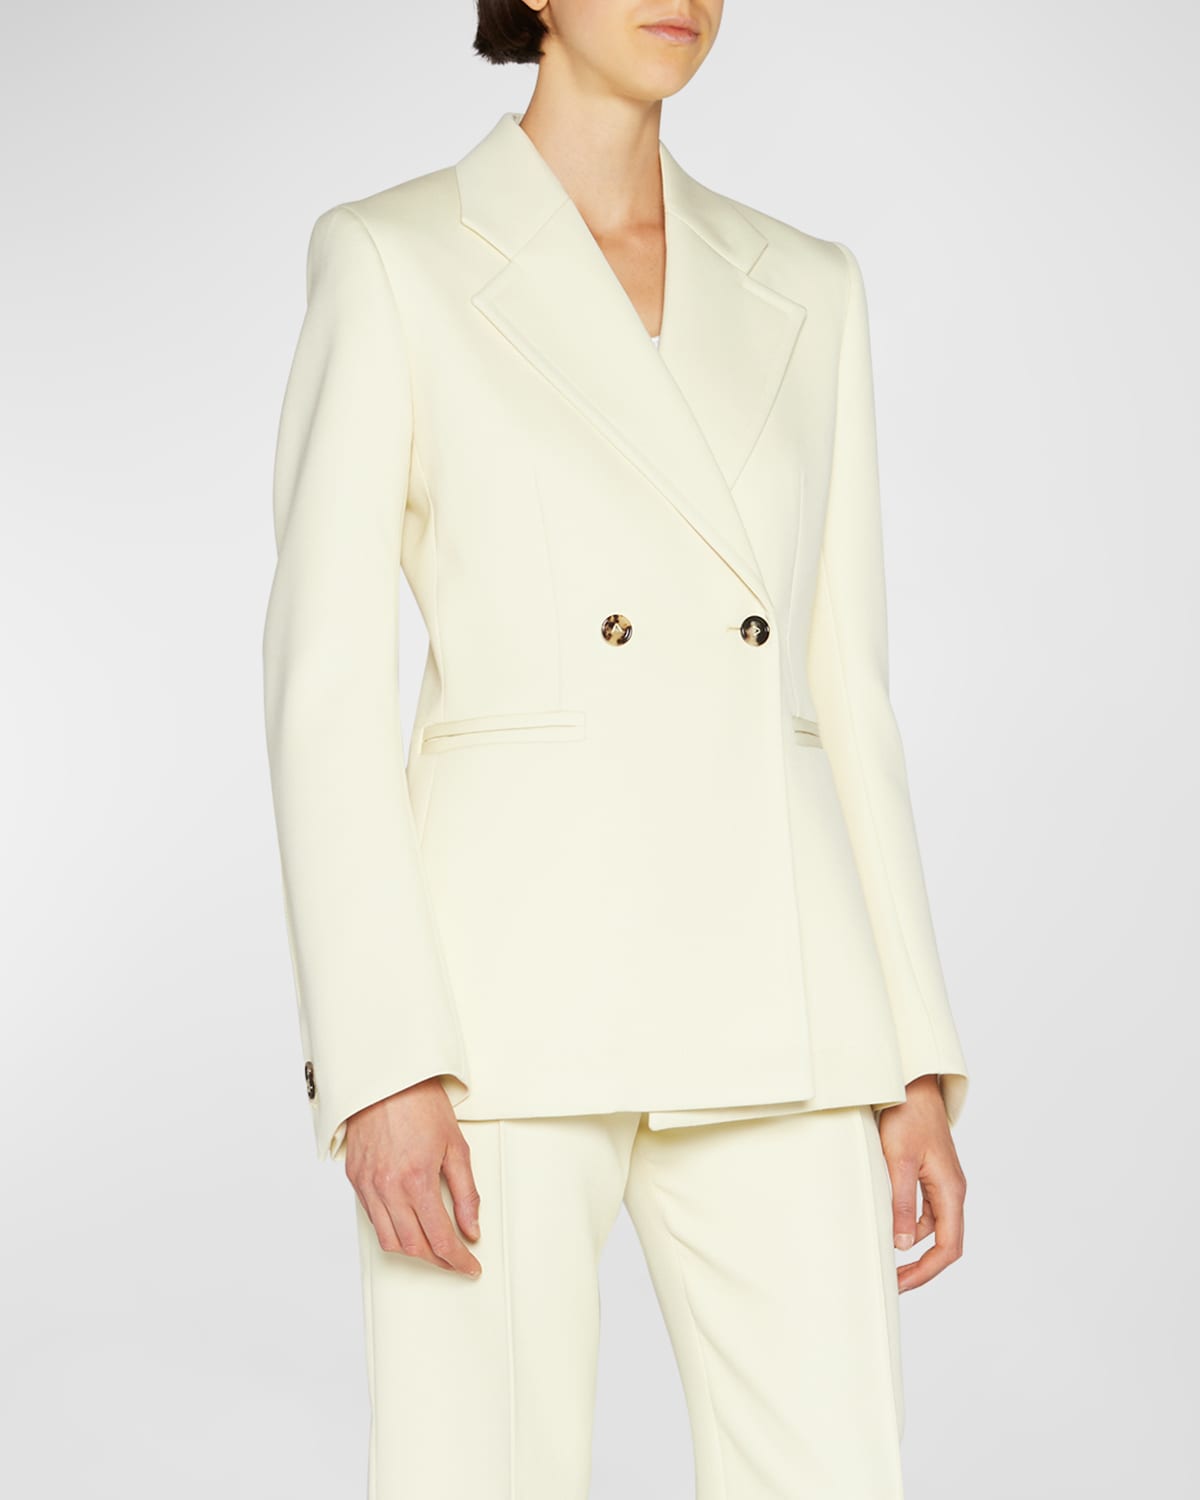 Wool Compact Suit Jacket w/ Curved Sleeves